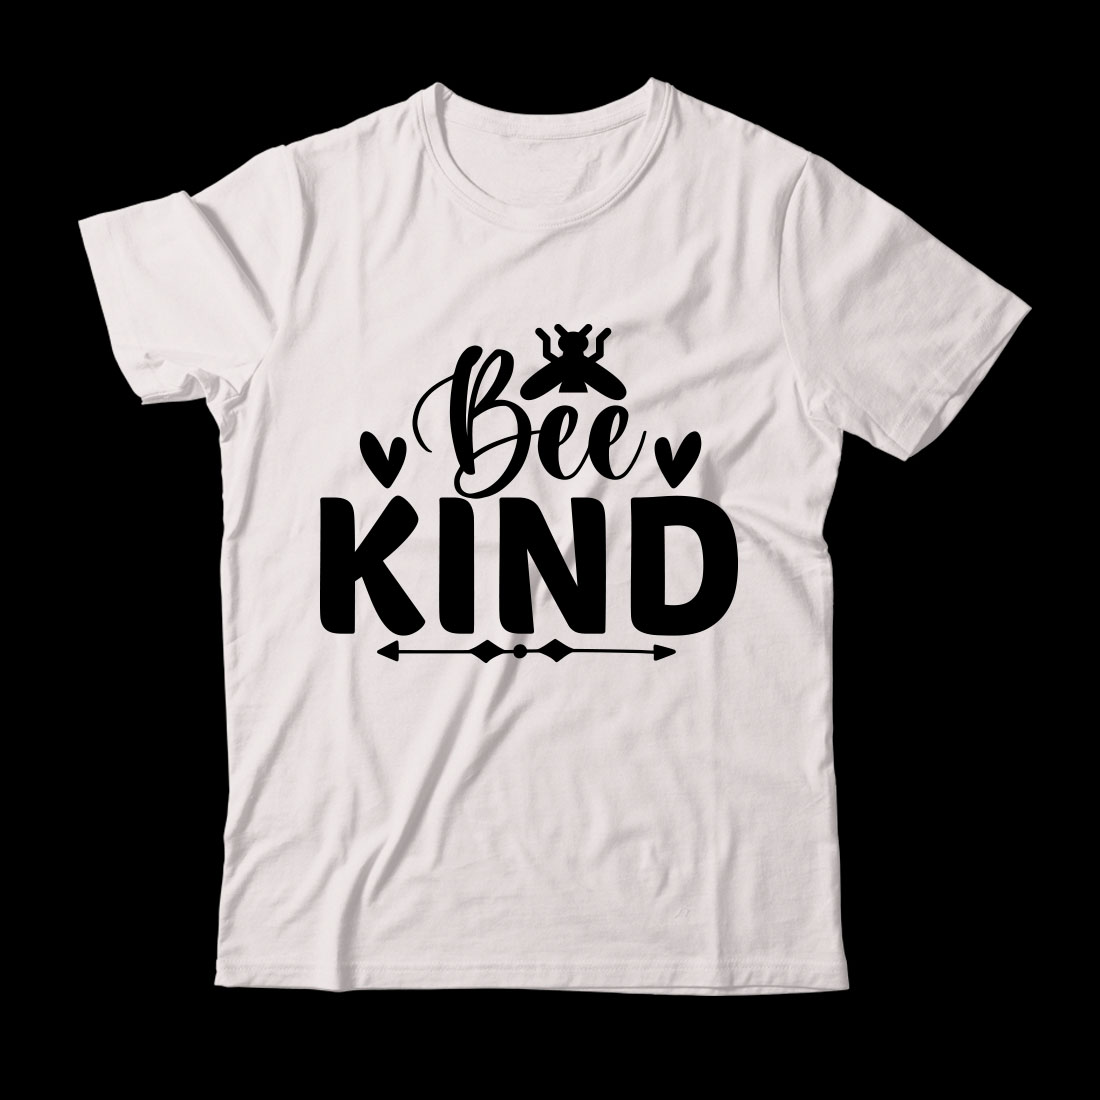 White t - shirt that says bee kind.